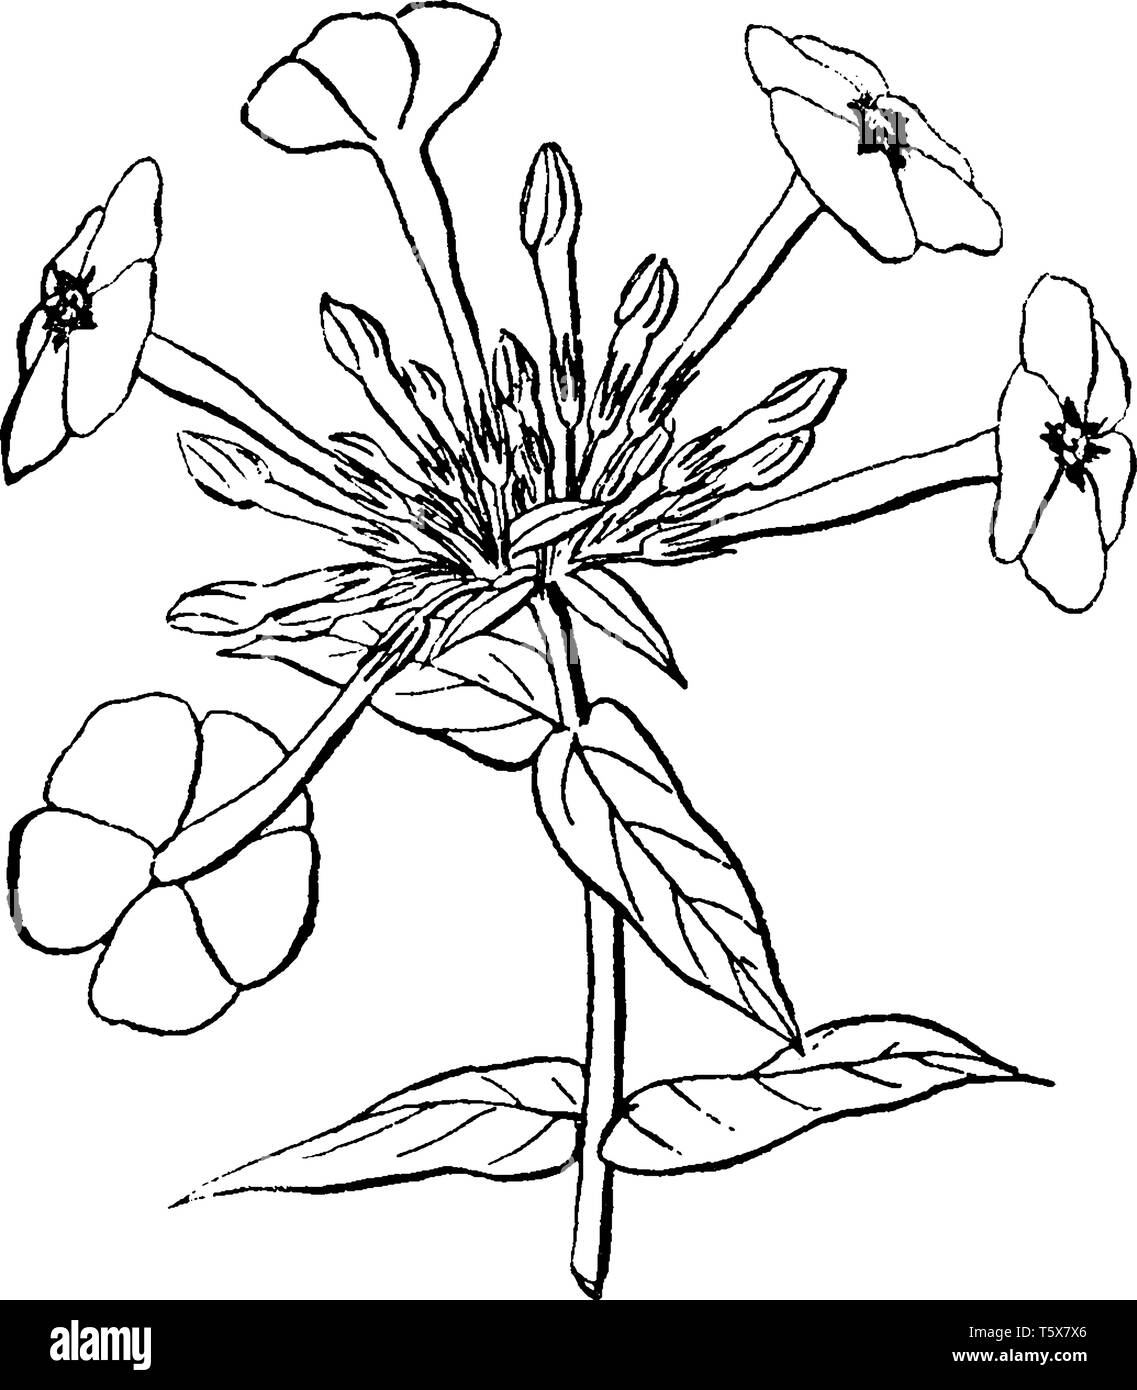 This picture is showing a flower of annual phlox their other names are Phlox drummondii and Drummond's phlox member of Polemoniaceae family mostly fou Stock Vector